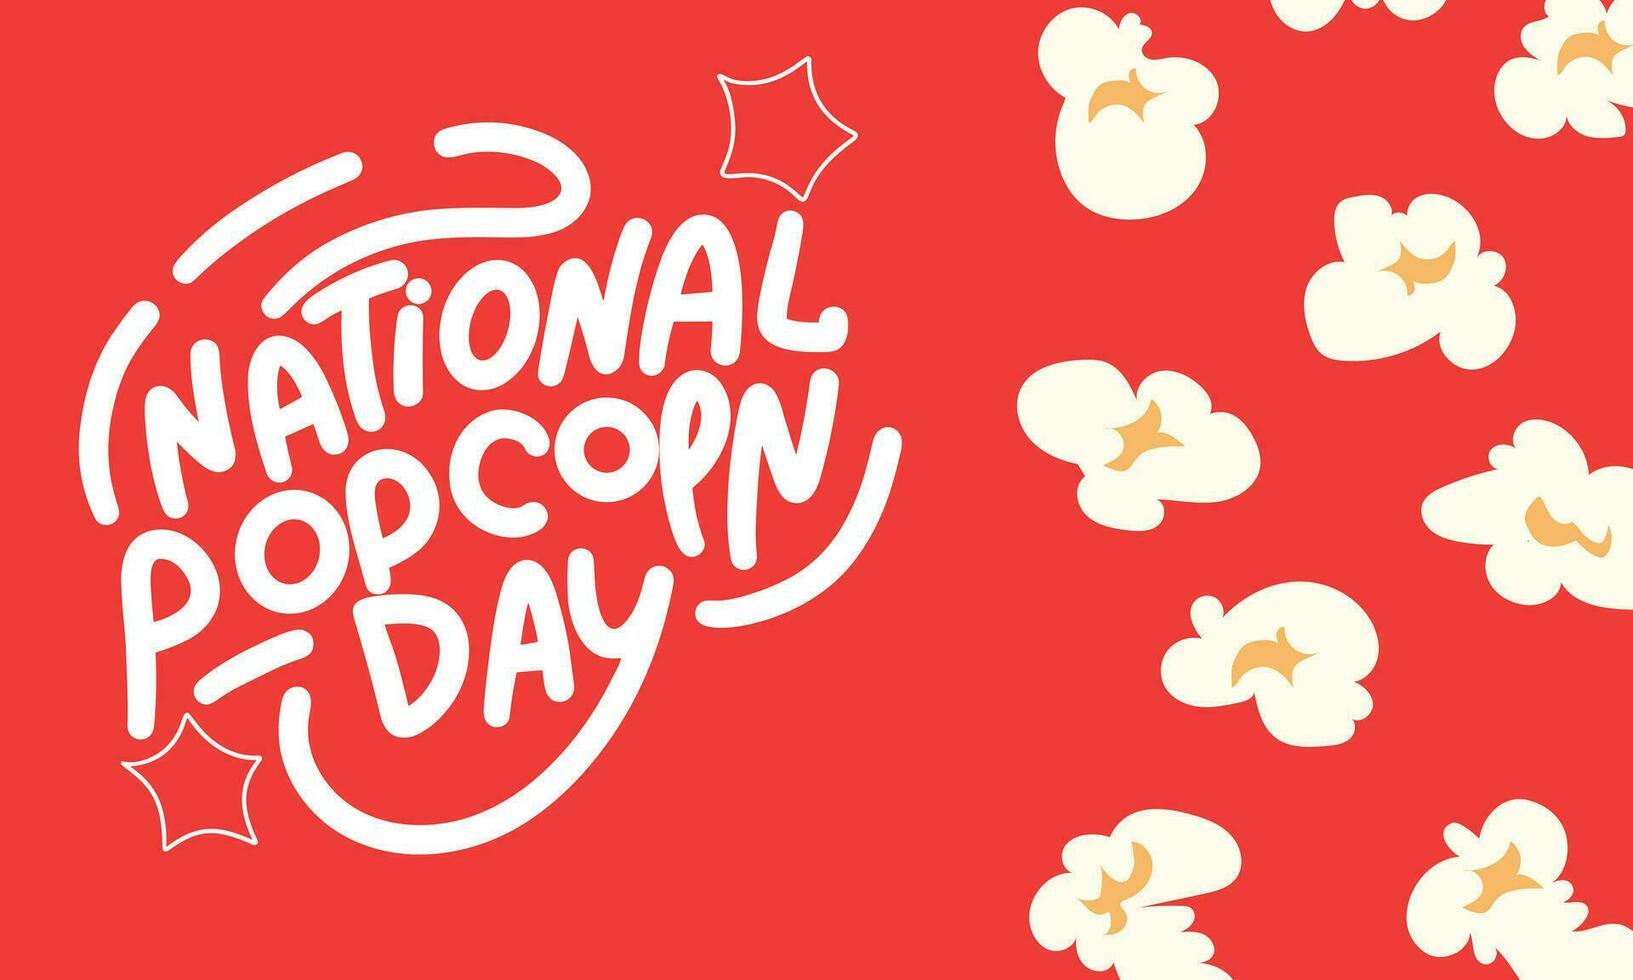 National Popcorn Day banner. Popcorn isolated on red background. Handwriting text National Popcorn Day. Hand drawn vector art.